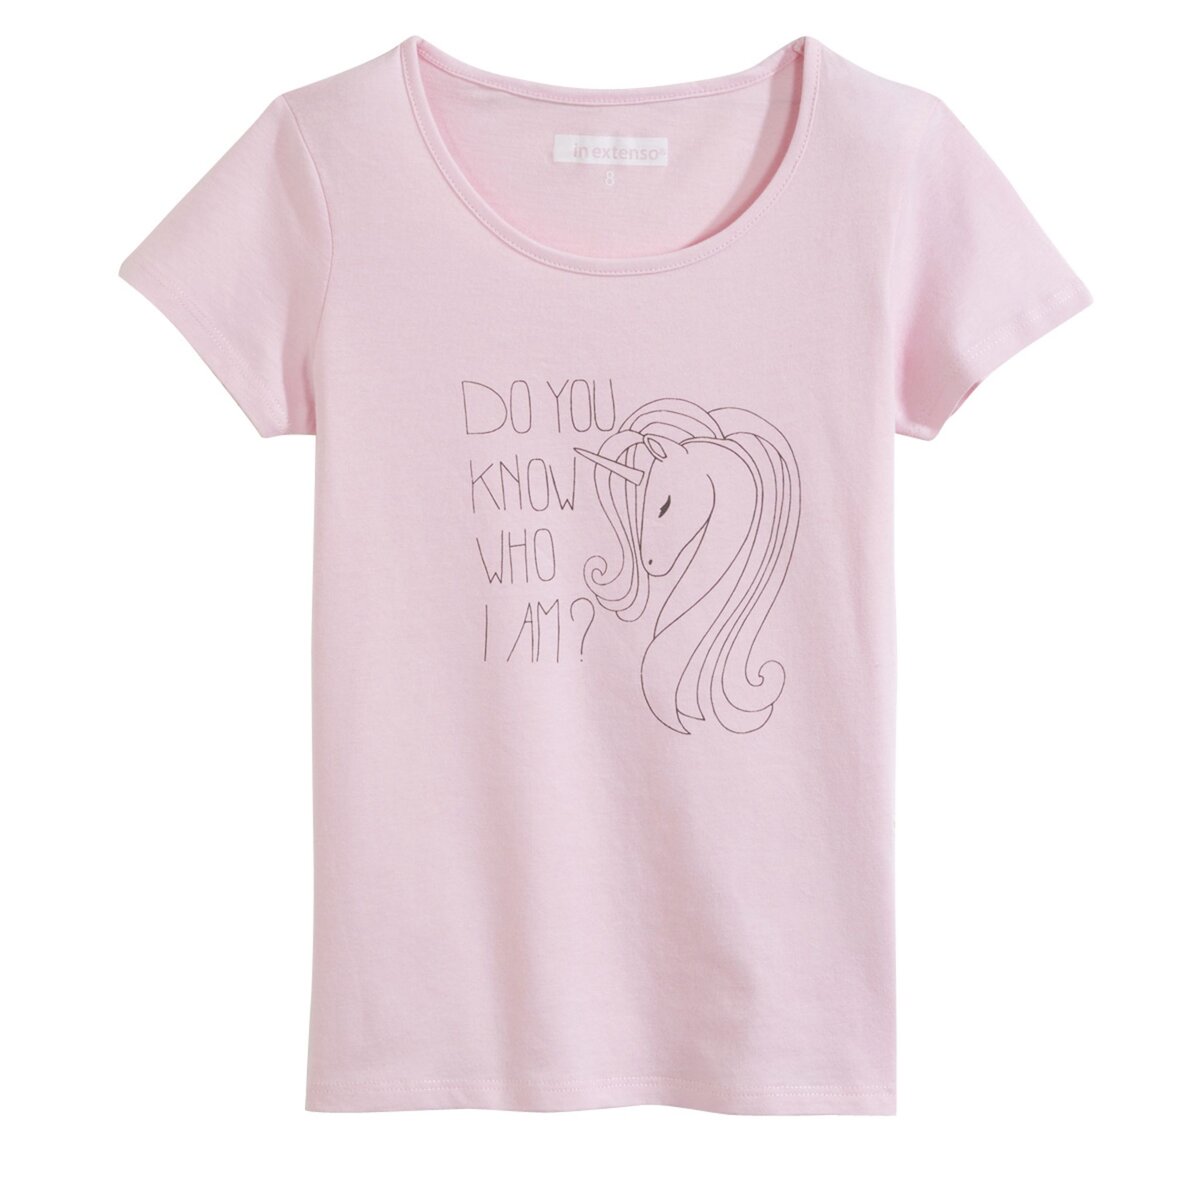 INEXTENSO T-shirt licorne manches courtes fille 